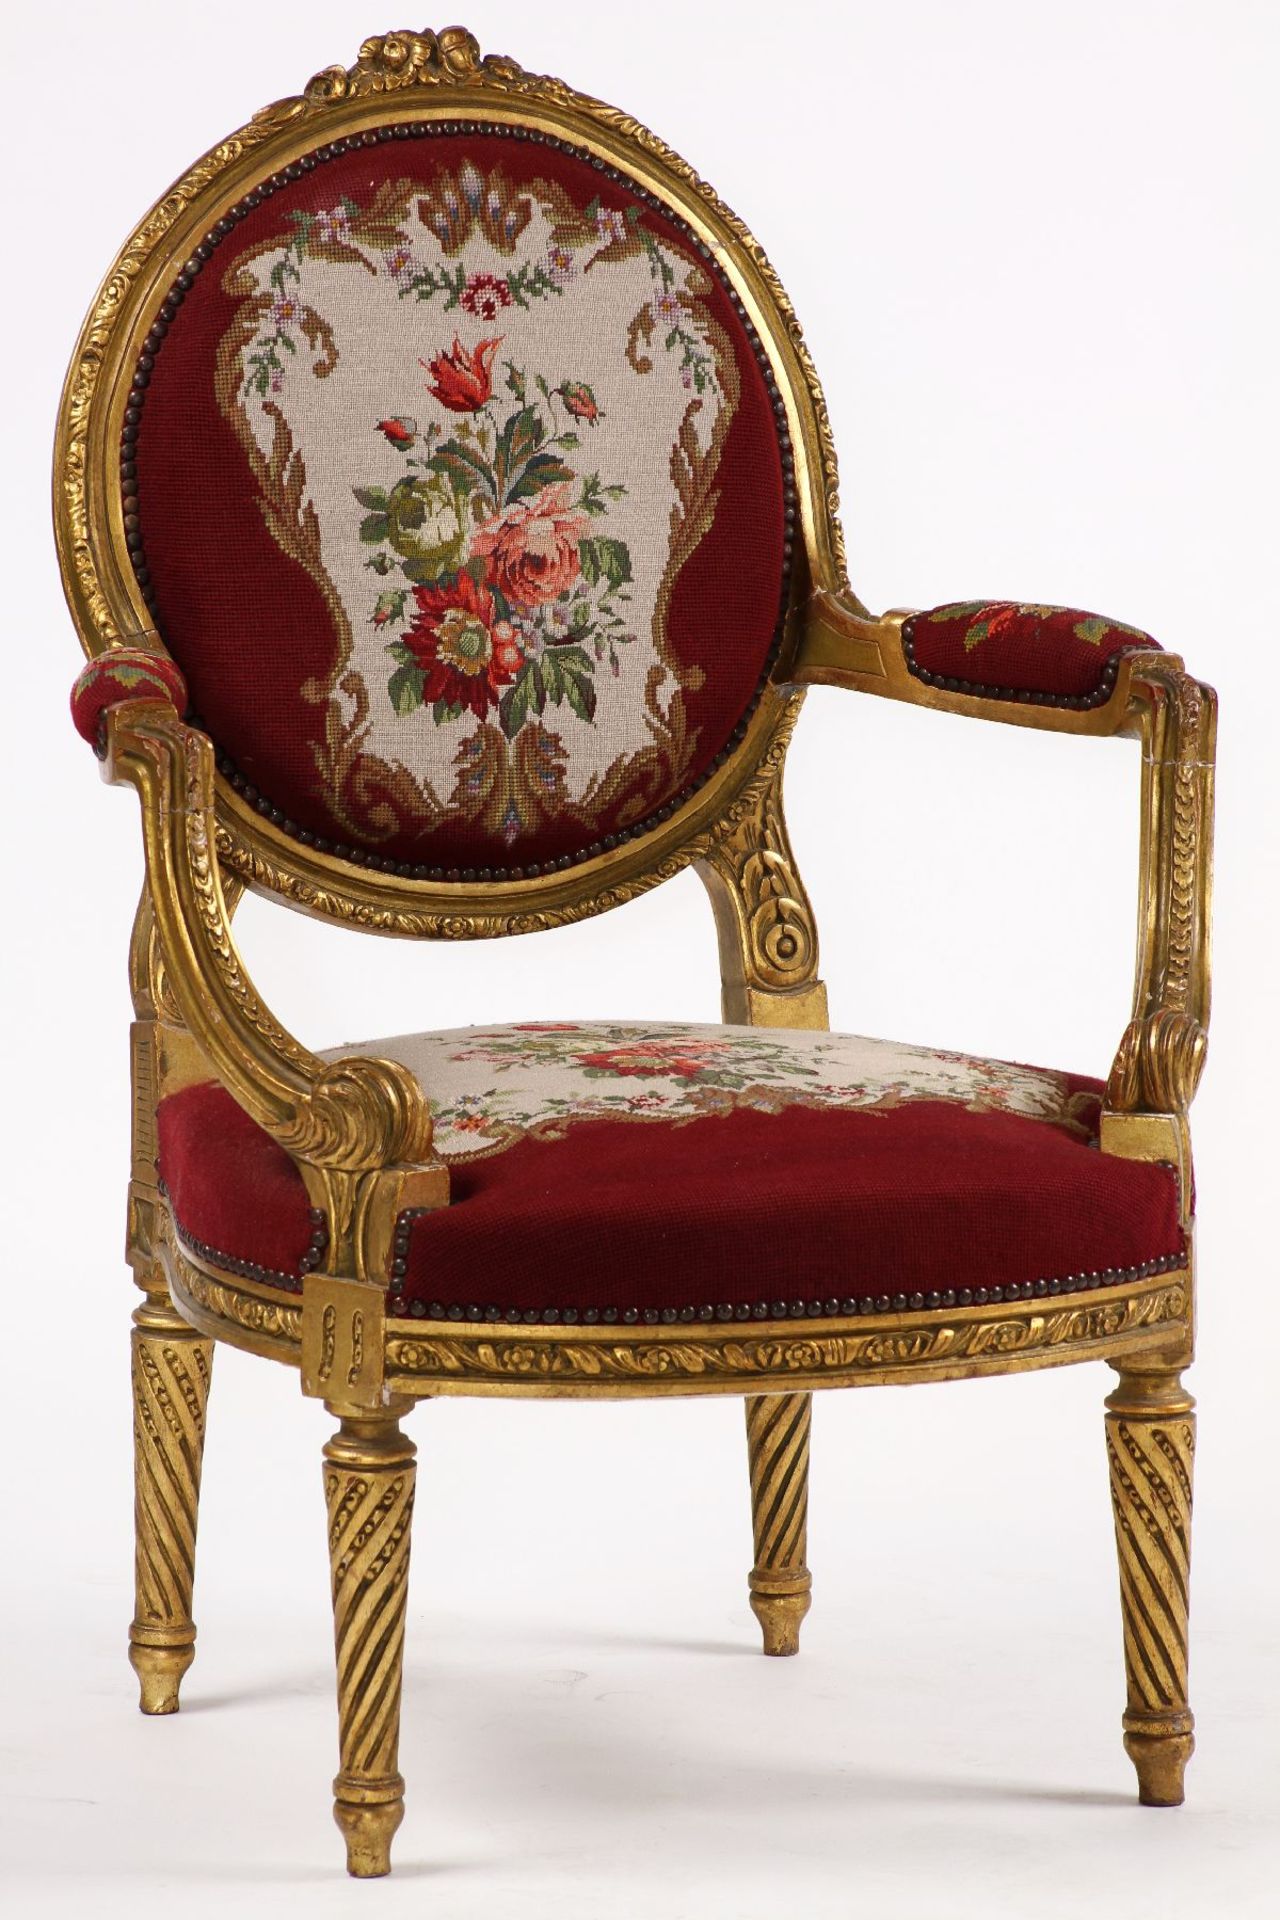 Armchair, frame in solid wood, painted gold, abstract floral decorative frieze and elaborately